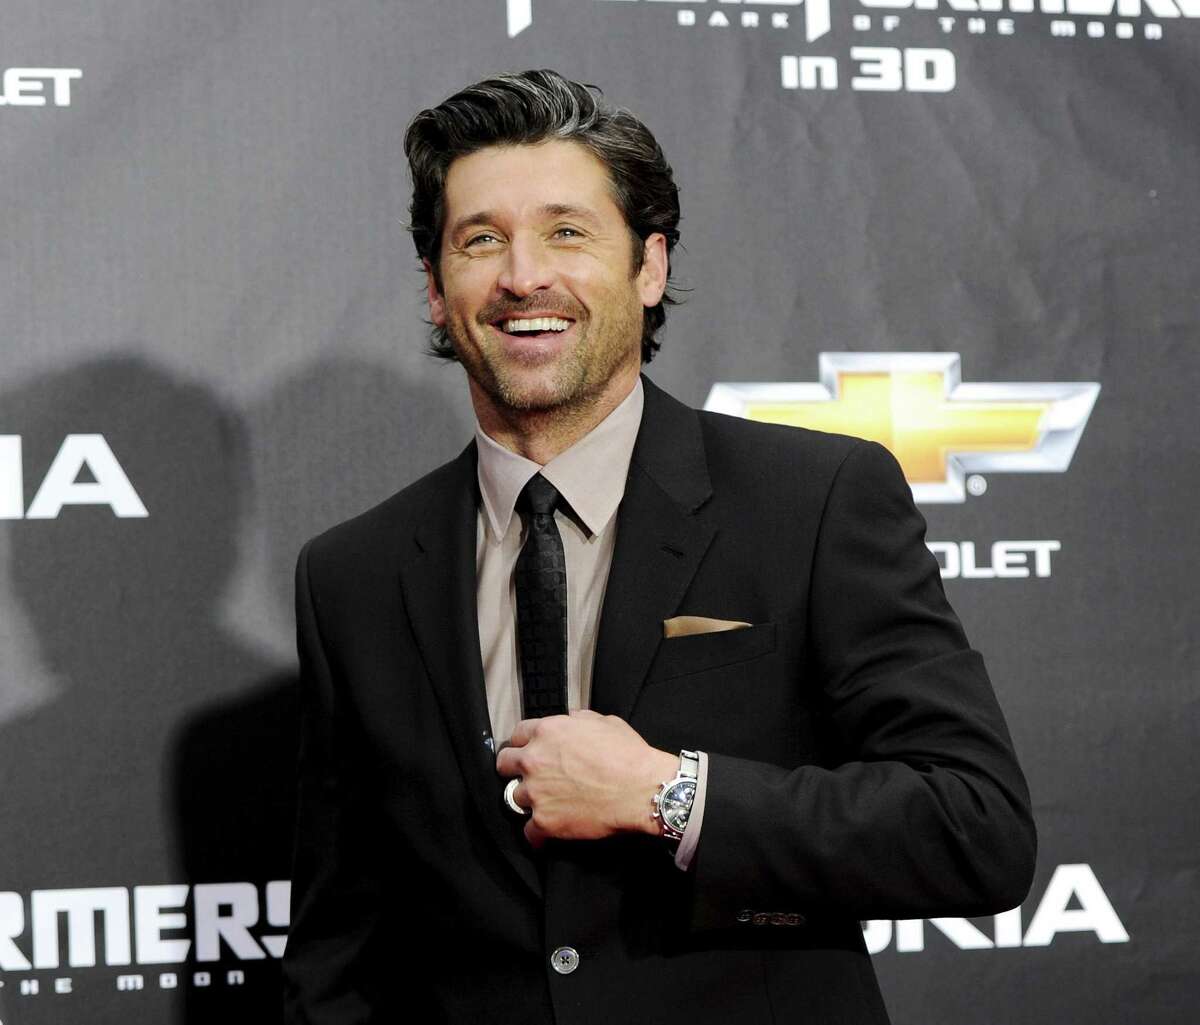 FILE - In this June 28, 2011 file photo, actor Patrick Dempsey attends the "Transformers: Dark Of The Moon'" premiere in Times Square in New York. Dempsey is returning home this weekend to receive an award for his leadership in caring for cancer patients Dempsey, most famous for his role as Dr. Derek Shepherd in the television series ìGreyís Anatomy,î is scheduled to receive the Maine Creative Industries Award on Saturday, Nov. 15, 2014 in Portland. He helped found the Patrick Dempsey Center for Cancer Hope & Healing at Central Maine Medical Center in Lewiston. He was driven by his motherís battle with ovarian cancer. Amanda Dempsey died in March at age 77. (AP Photo/Evan Agostini, File)